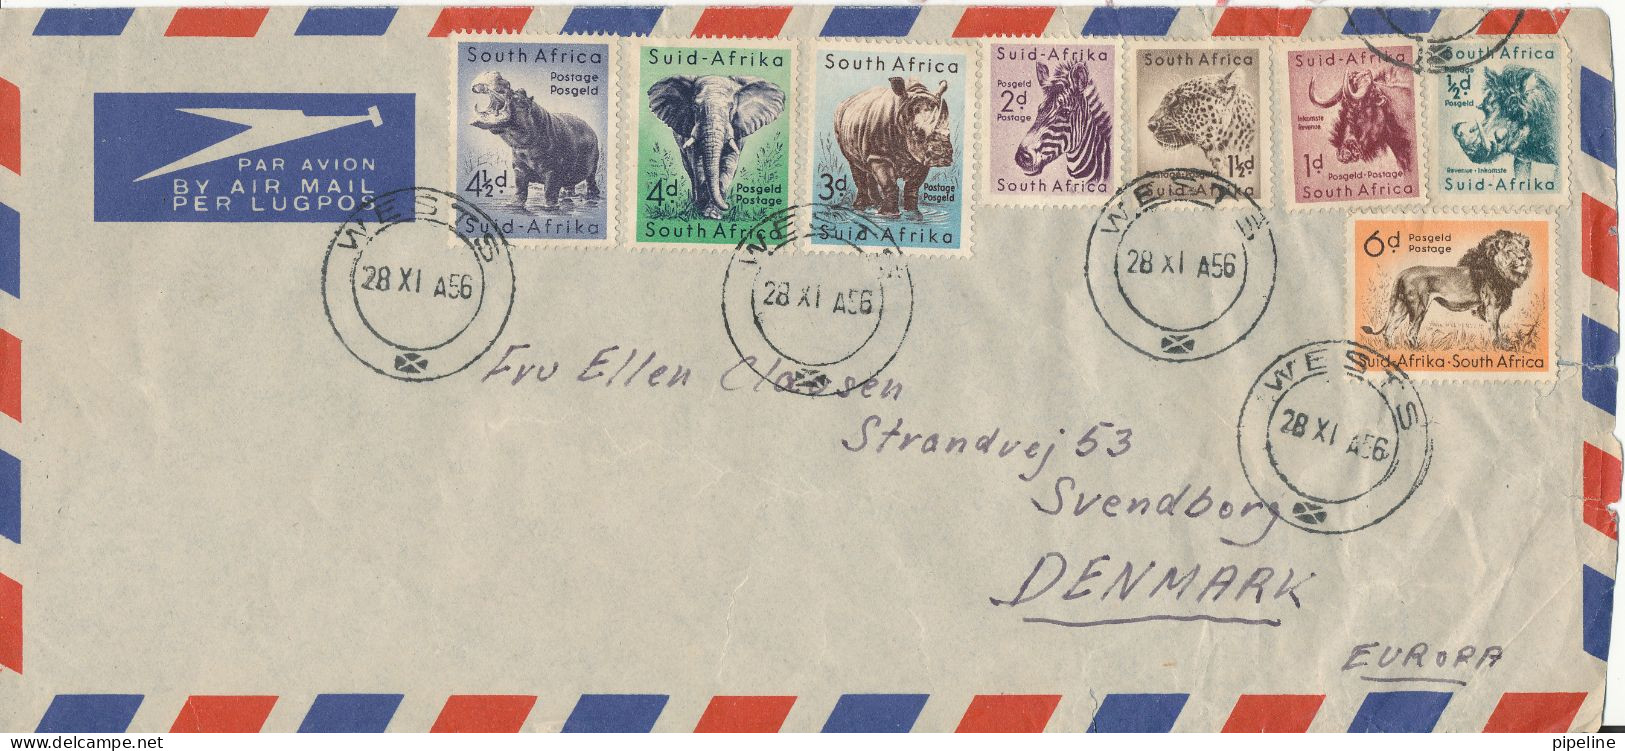 South Africa -Suid Afrika Air Mail Cover Sent To Denmark Wests 28-11-1956 With A Lot Of Topical Stamps - Poste Aérienne